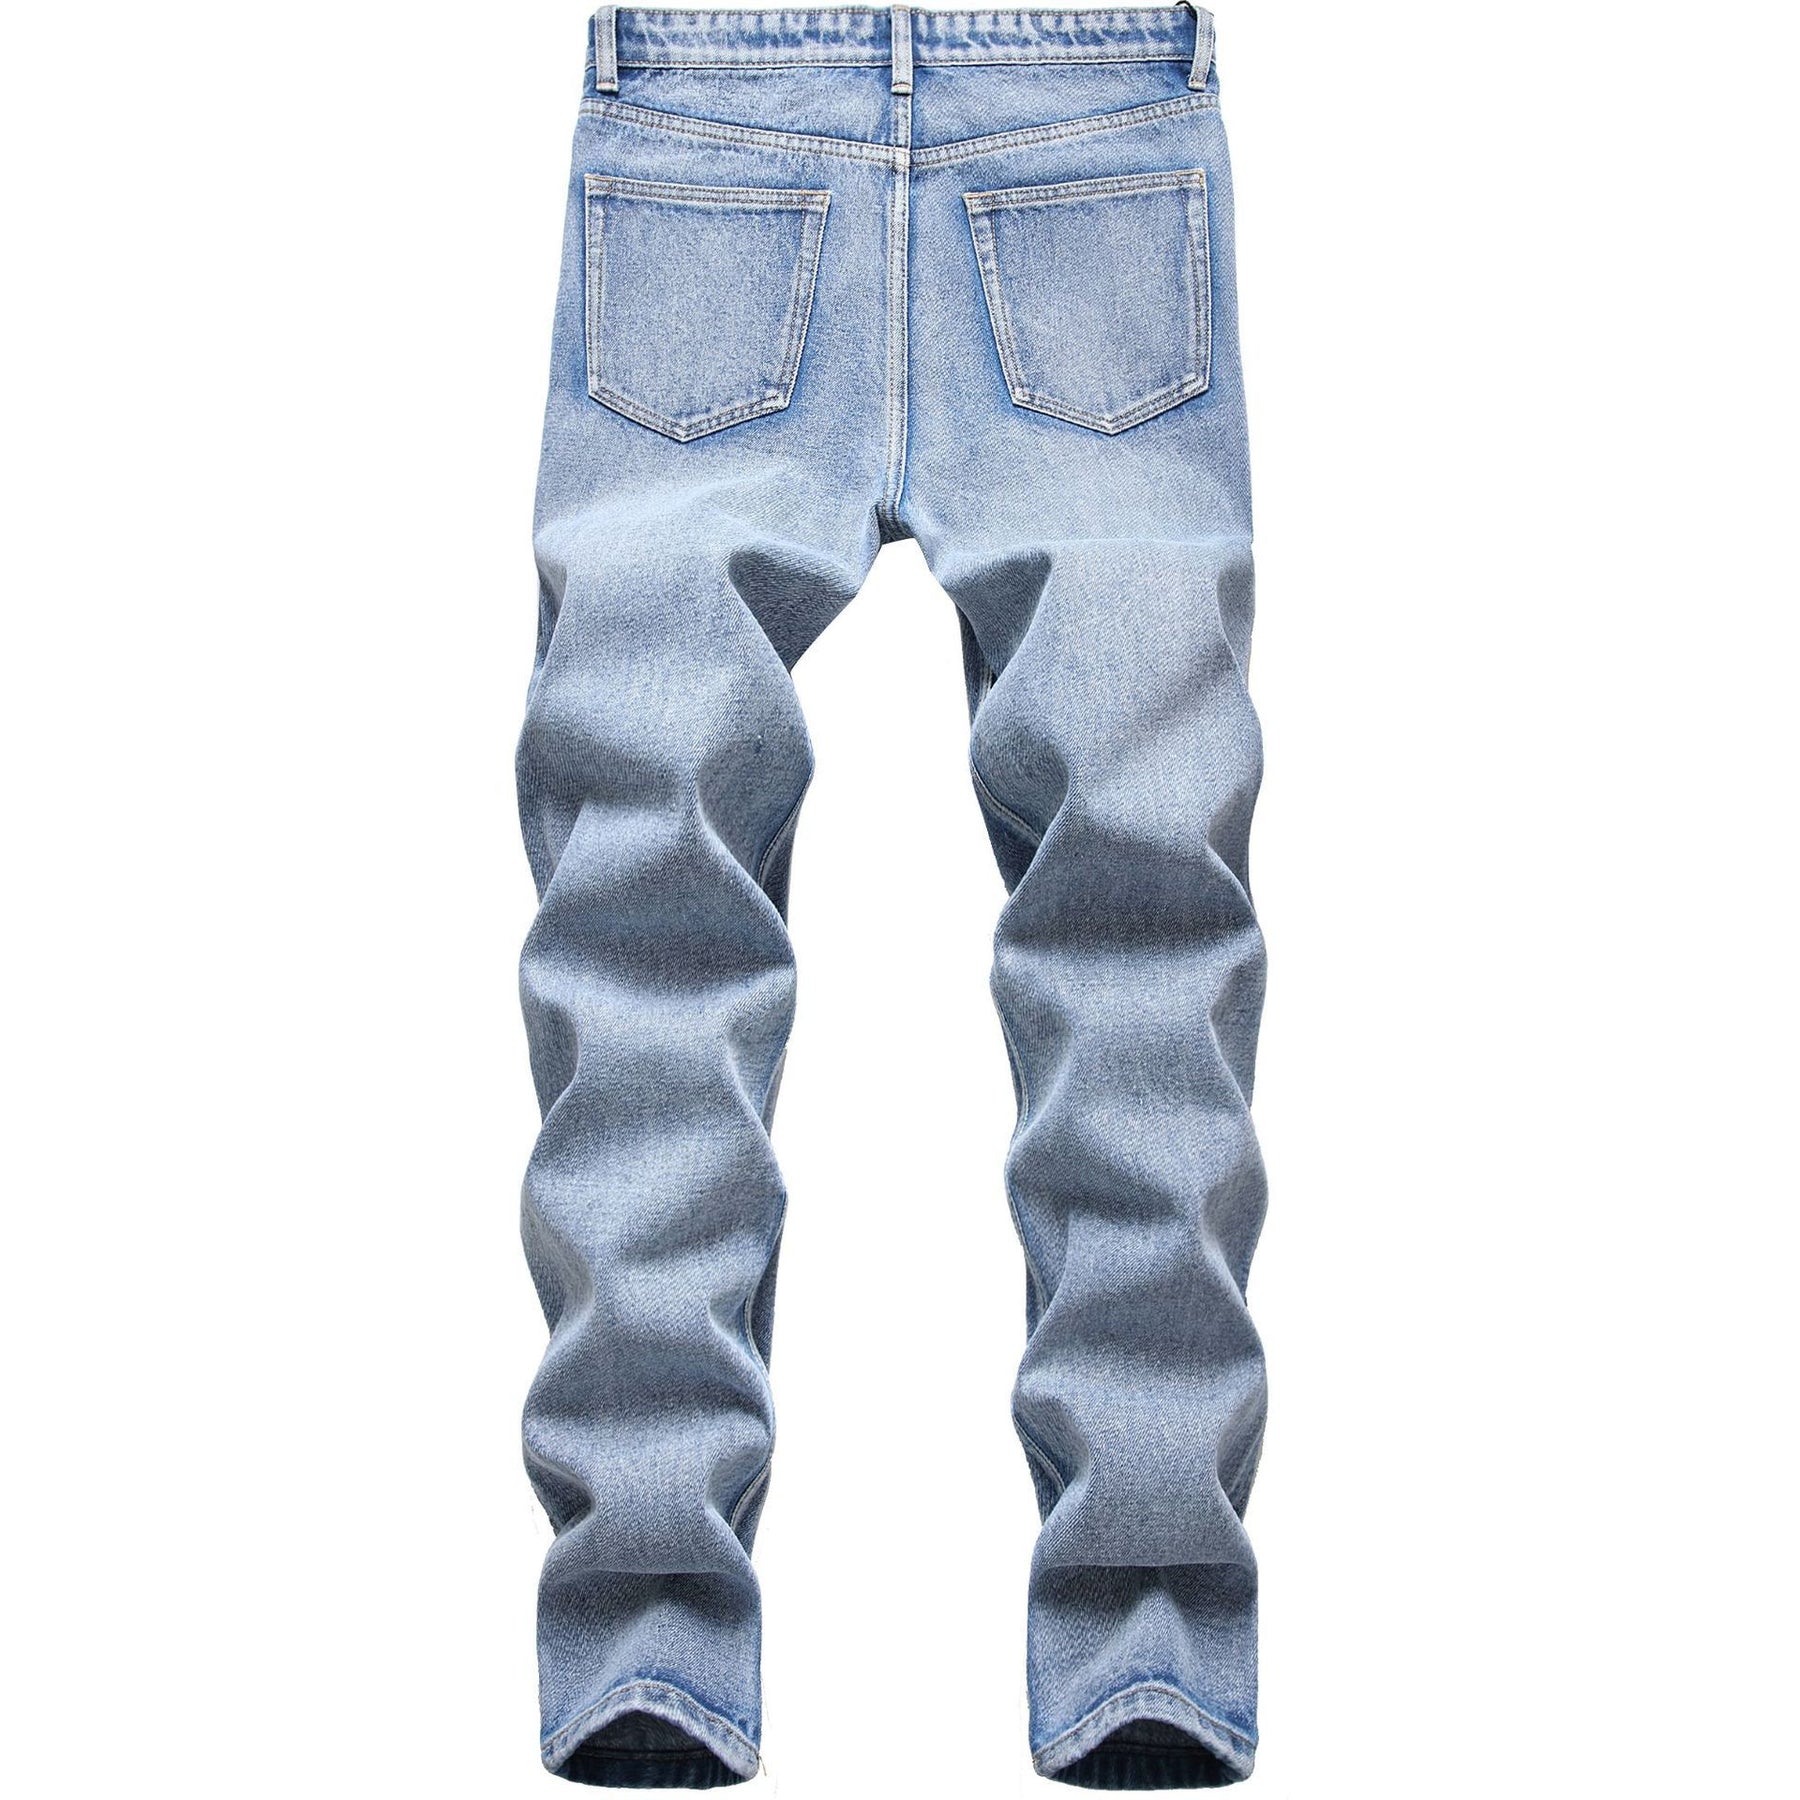 New in Jeans – FLYBARON